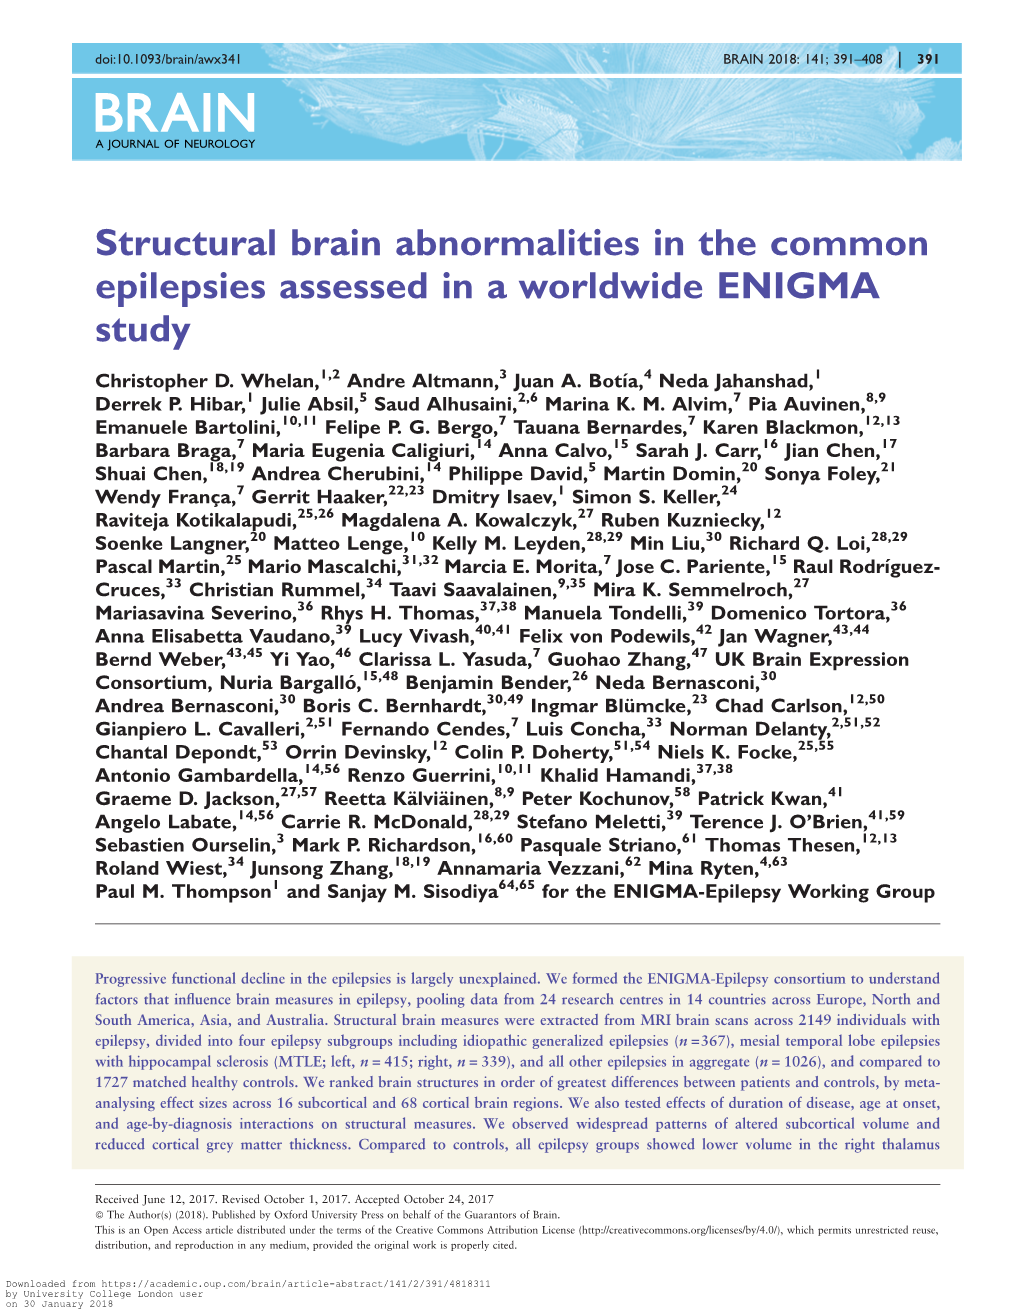 Structural Brain Abnormalities in the Common Epilepsies Assessed in a Worldwide ENIGMA Study